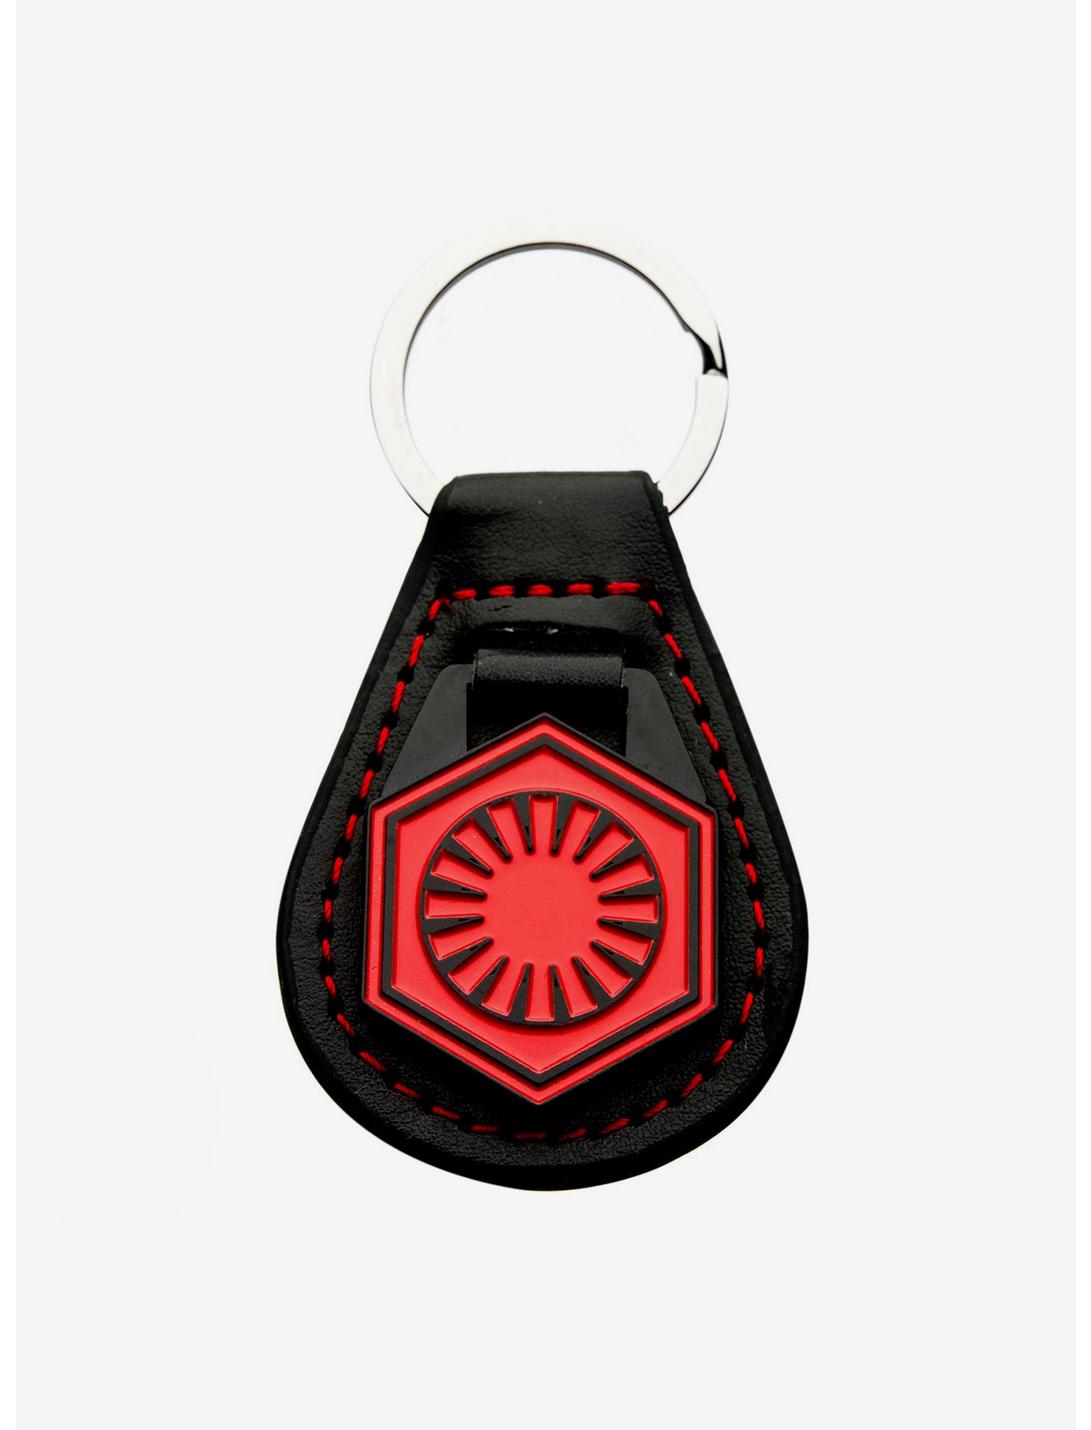 Star Wars: The Force Awakens First Order Key Chain, , hi-res